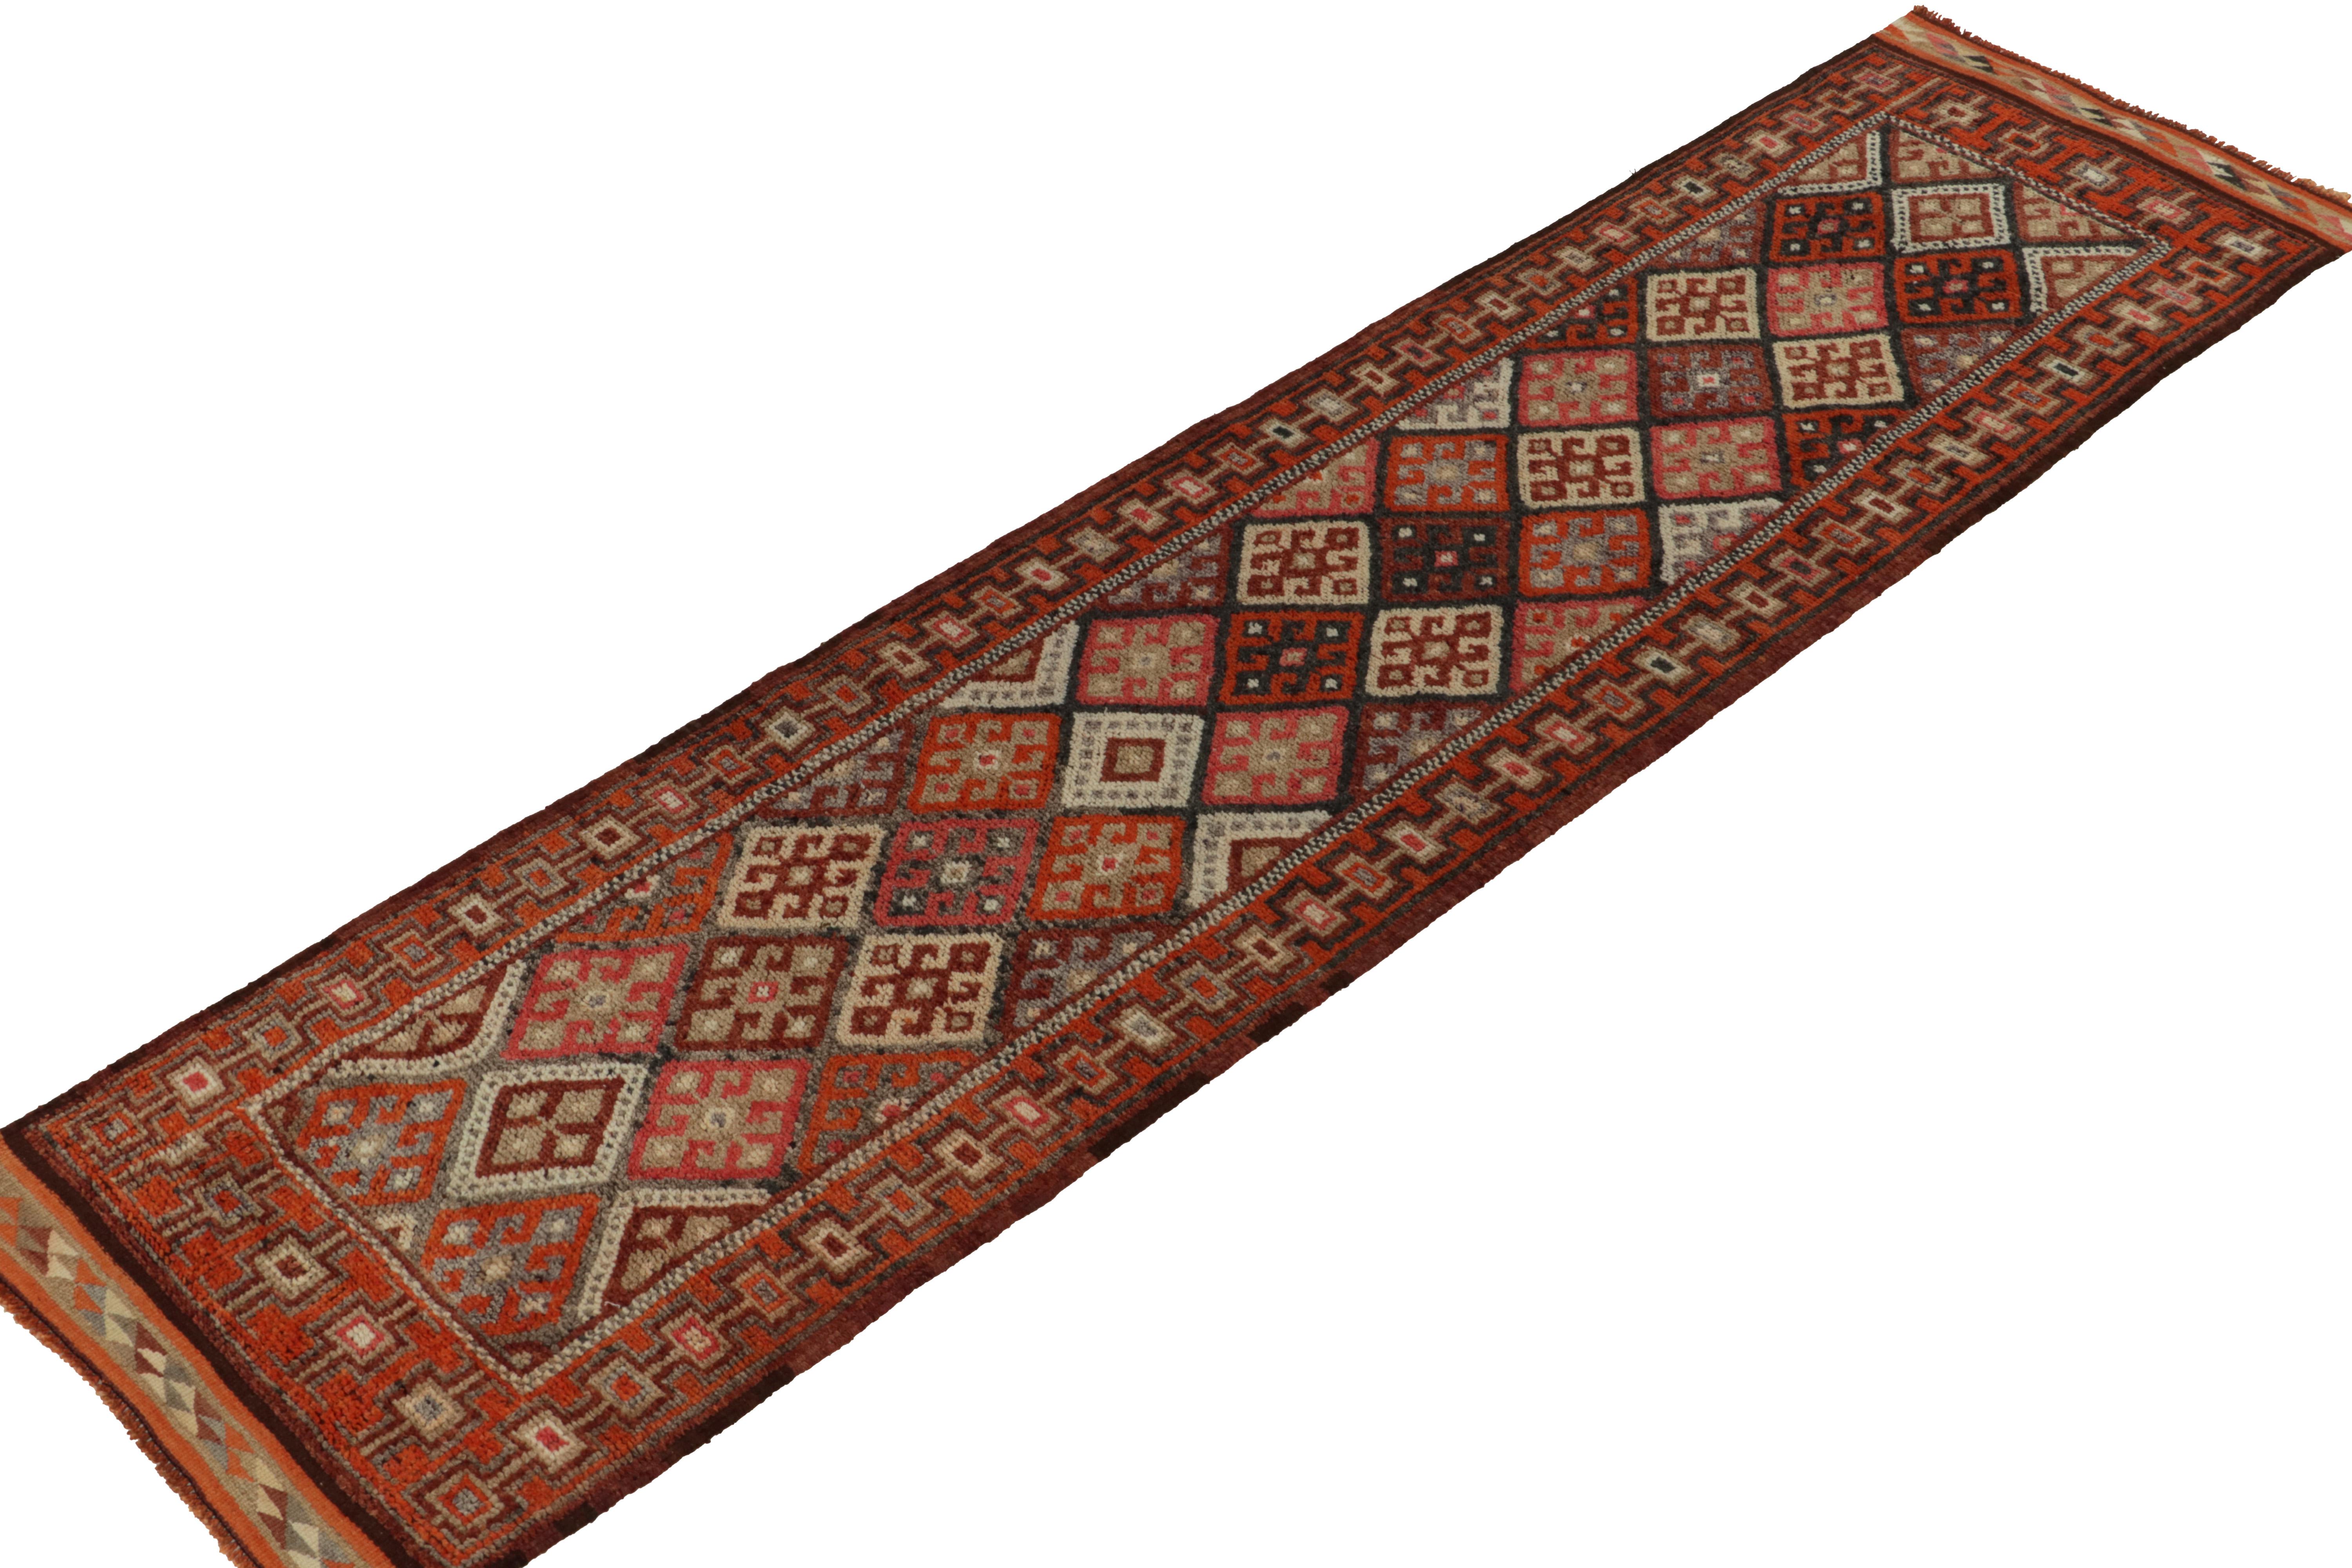 From R&K Principal Josh Nazmiyal’s latest acquisitions, a profound 3x12 vintage tribal runner originating from Turkey circa 1950-1960. 

On the Design: 

All-over geometric patterns include traditional motifs encased in diamond patterns of warm